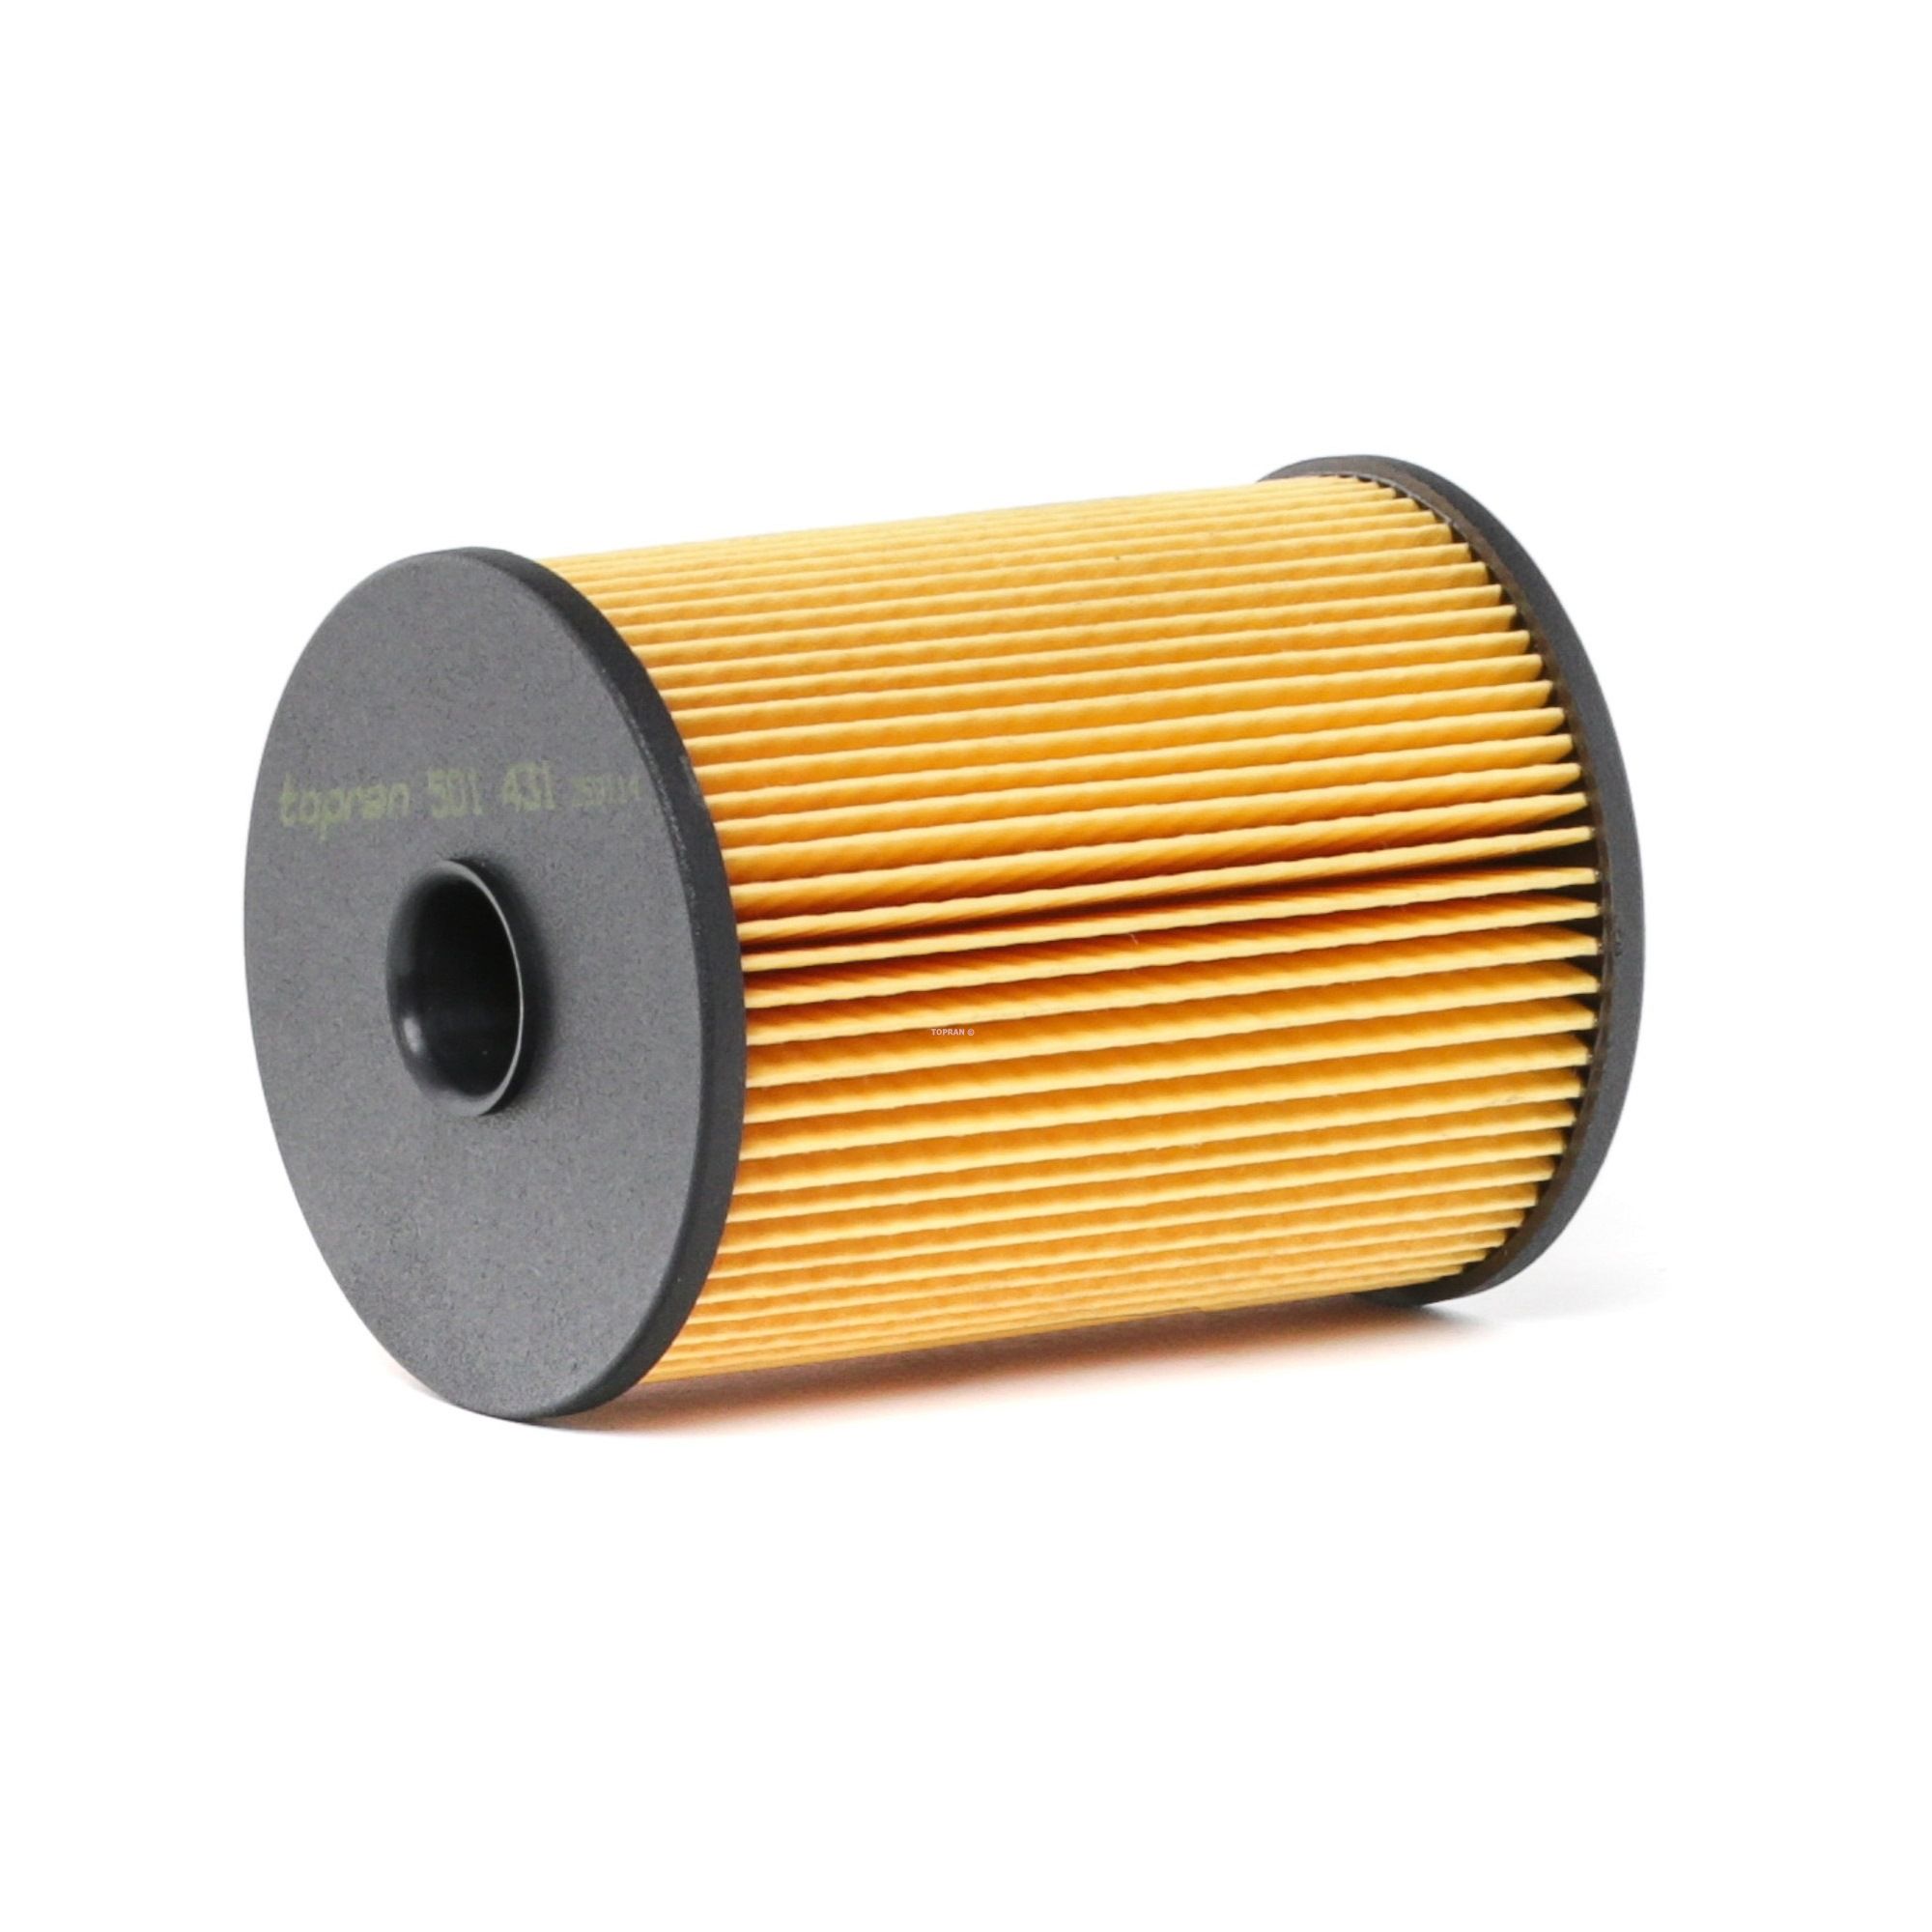 501 431 001 TOPRAN Filter Insert, with gaskets/seals Height: 100mm Inline fuel filter 501 431 buy